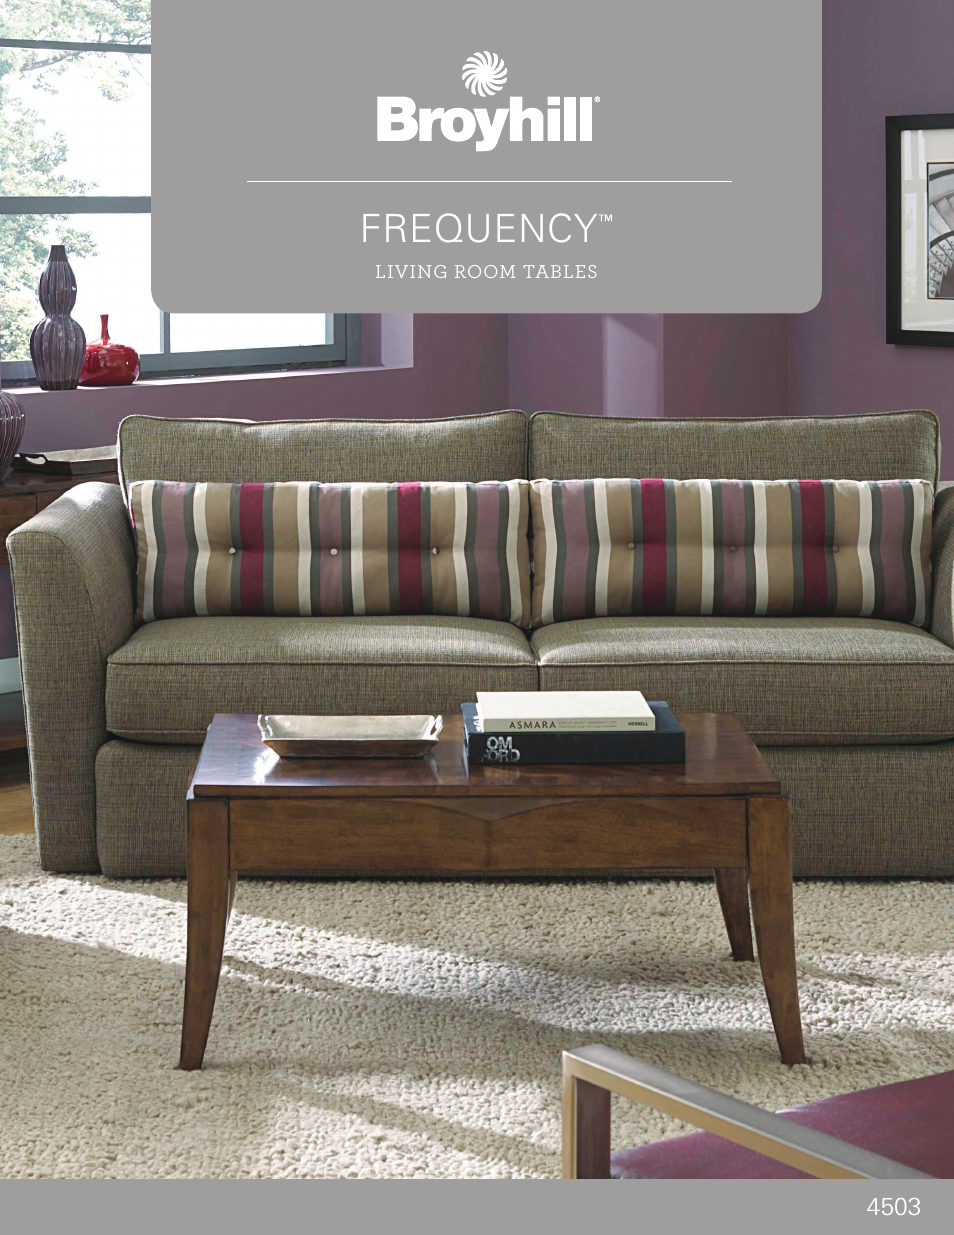 FREQUENCY CHAIRSIDE TABLE Product Details